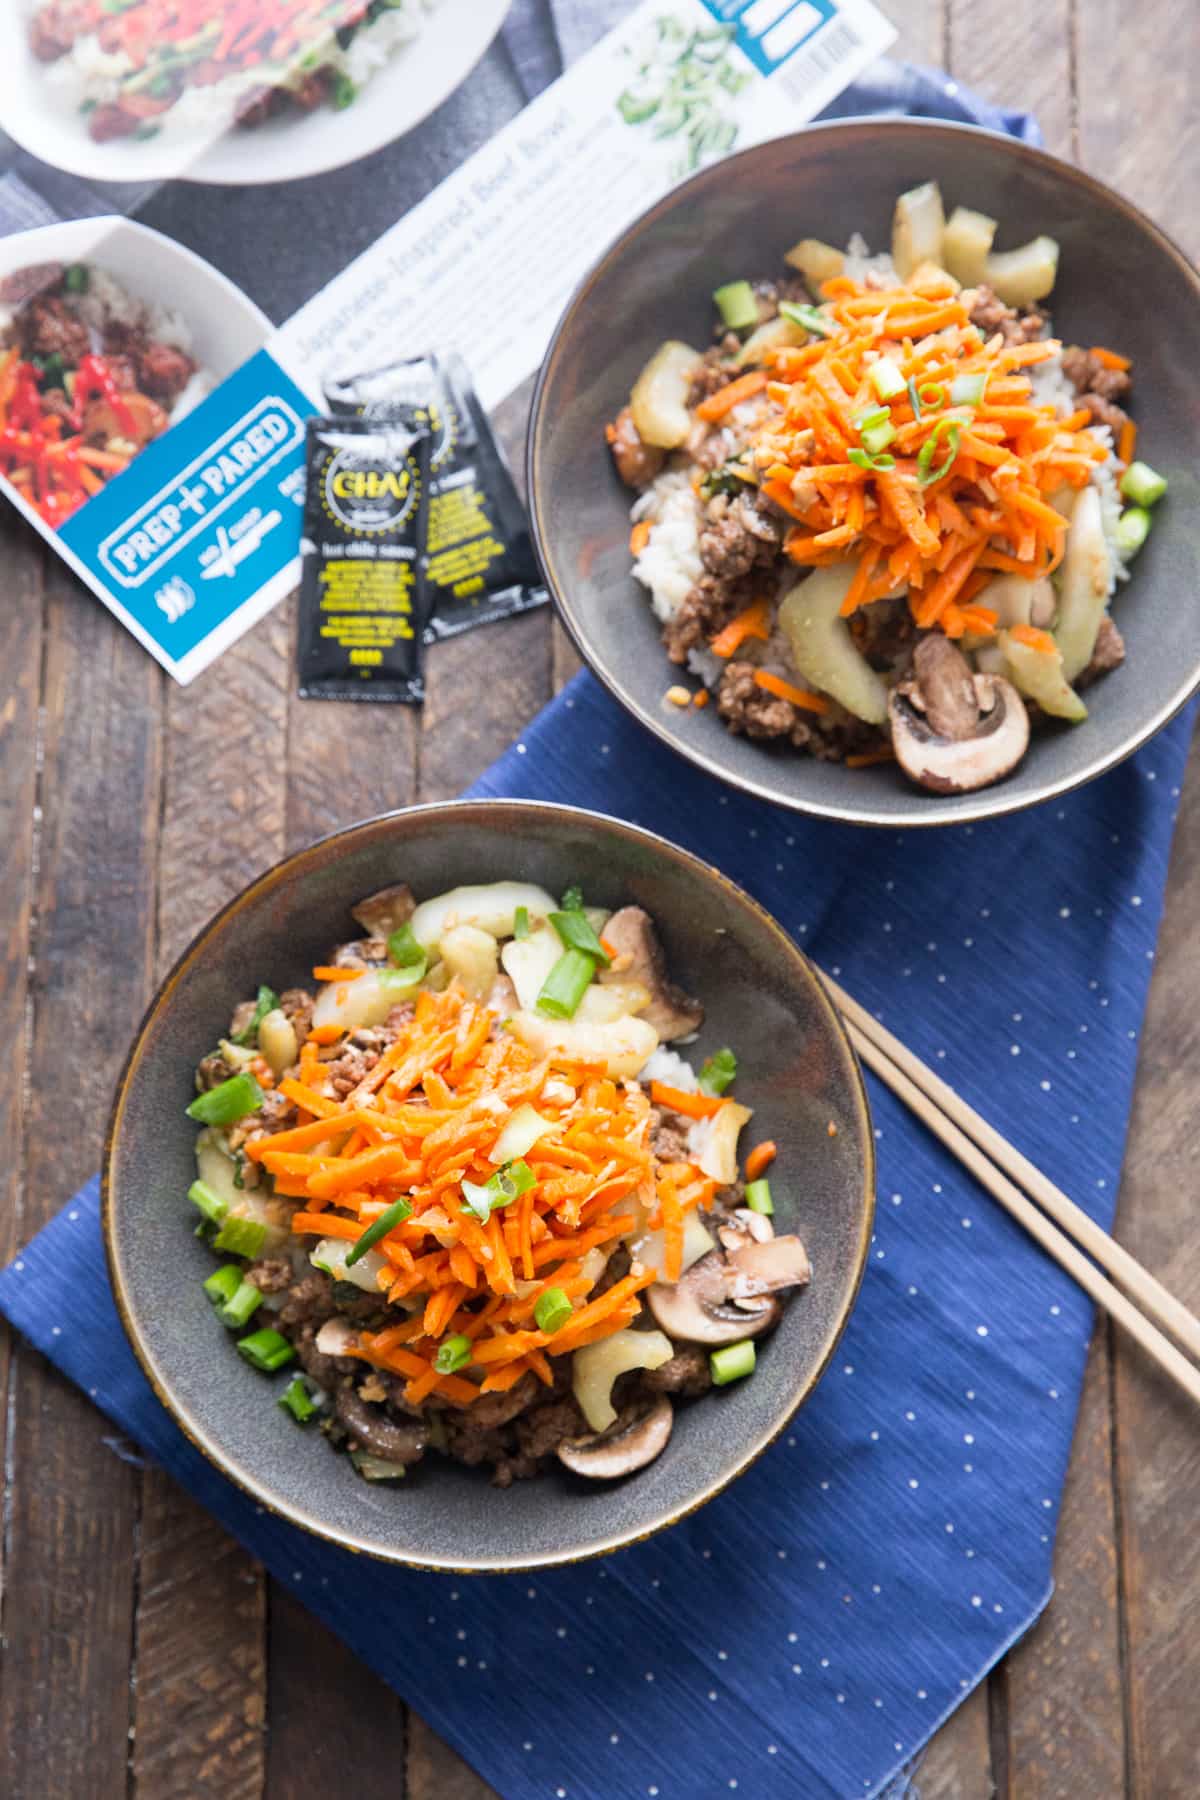 Thees easy beef bowls are the perfect date night meal! Prep and Pared meal kits make it so simple!